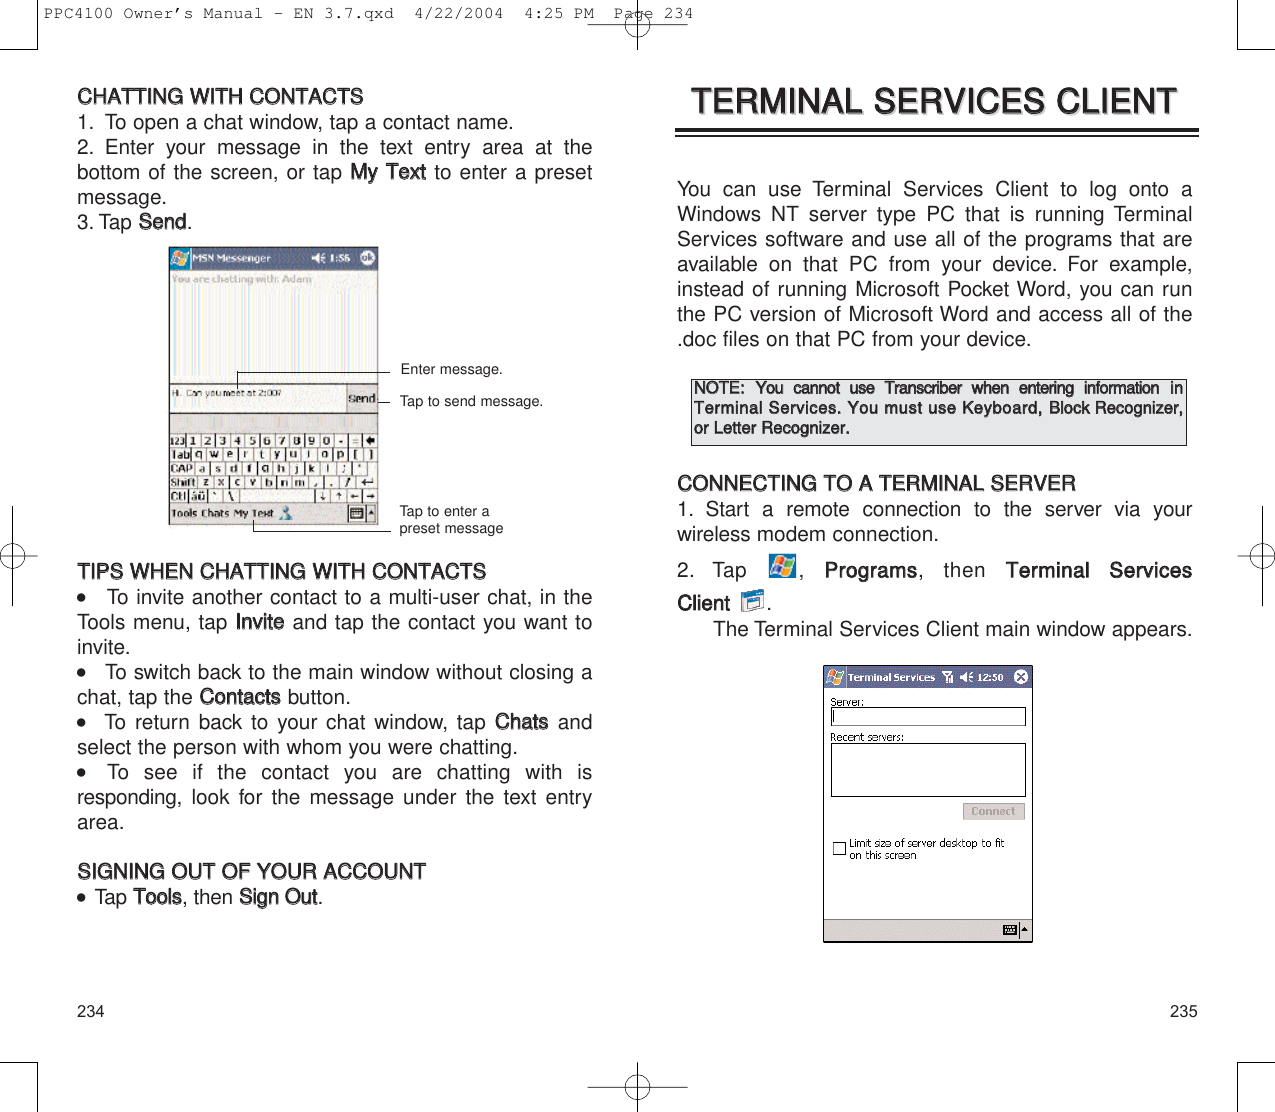 235234You can use Terminal Services Client to log onto aWindows NT server type PC that is running TerminalServices software and use all of the programs that areavailable on that PC from your device. For example,instead of running Microsoft Pocket Word, you can runthe PC version of Microsoft Word and access all of the.doc files on that PC from your device.CCOONNNNEECCTTIINNGG  TTOO  AA  TTEERRMMIINNAALL  SSEERRVVEERR1. Start a remote connection to the server via your wireless modem connection.2. Tap , PPrrooggrraammss, then TTeerrmmiinnaall  SSeerrvviicceess  CClliieenntt  .The Terminal Services Client main window appears.TTEERRMMIINNAALL  SSEERRVVIICCEESS  CCLLIIEENNTTTTEERRMMIINNAALL  SSEERRVVIICCEESS  CCLLIIEENNTTNNOOTTEE::  YYoouu  ccaannnnoott  uussee  TTrraannssccrriibbeerr  wwhheenn  eenntteerriinngg  iinnffoorrmmaattiioonniinnTTeerrmmiinnaall  SSeerrvviicceess..  YYoouu  mmuusstt  uussee  KKeeyybbooaarrdd,,  BBlloocckk  RReeccooggnniizzeerr,,oorr  LLeetttteerr  RReeccooggnniizzeerr..CCHHAATTTTIINNGG  WWIITTHH  CCOONNTTAACCTTSS1. To open a chat window, tap a contact name.2. Enter your message in the text entry area at the bottom of the screen, or tap MMyy  TTeexxttto enter a presetmessage.3. Tap SSeenndd.TTIIPPSS  WWHHEENN  CCHHAATTTTIINNGG  WWIITTHH  CCOONNTTAACCTTSS    To invite another contact to a multi-user chat, in theTools menu, tap IInnvviitteeand tap the contact you want toinvite.    To switch back to the main window without closing achat, tap the CCoonnttaaccttssbutton.   To return back to your chat window, tap CChhaattssandselect the person with whom you were chatting.    To see if the contact you are chatting with is responding,  look for the message under the text entryarea.SSIIGGNNIINNGG  OOUUTT  OOFF  YYOOUURR  AACCCCOOUUNNTT  Tap TToooollss, then SSiiggnn  OOuutt.Enter message.Tap to send message.Tap to enter apreset messagePPC4100 Owner’s Manual - EN 3.7.qxd  4/22/2004  4:25 PM  Page 234